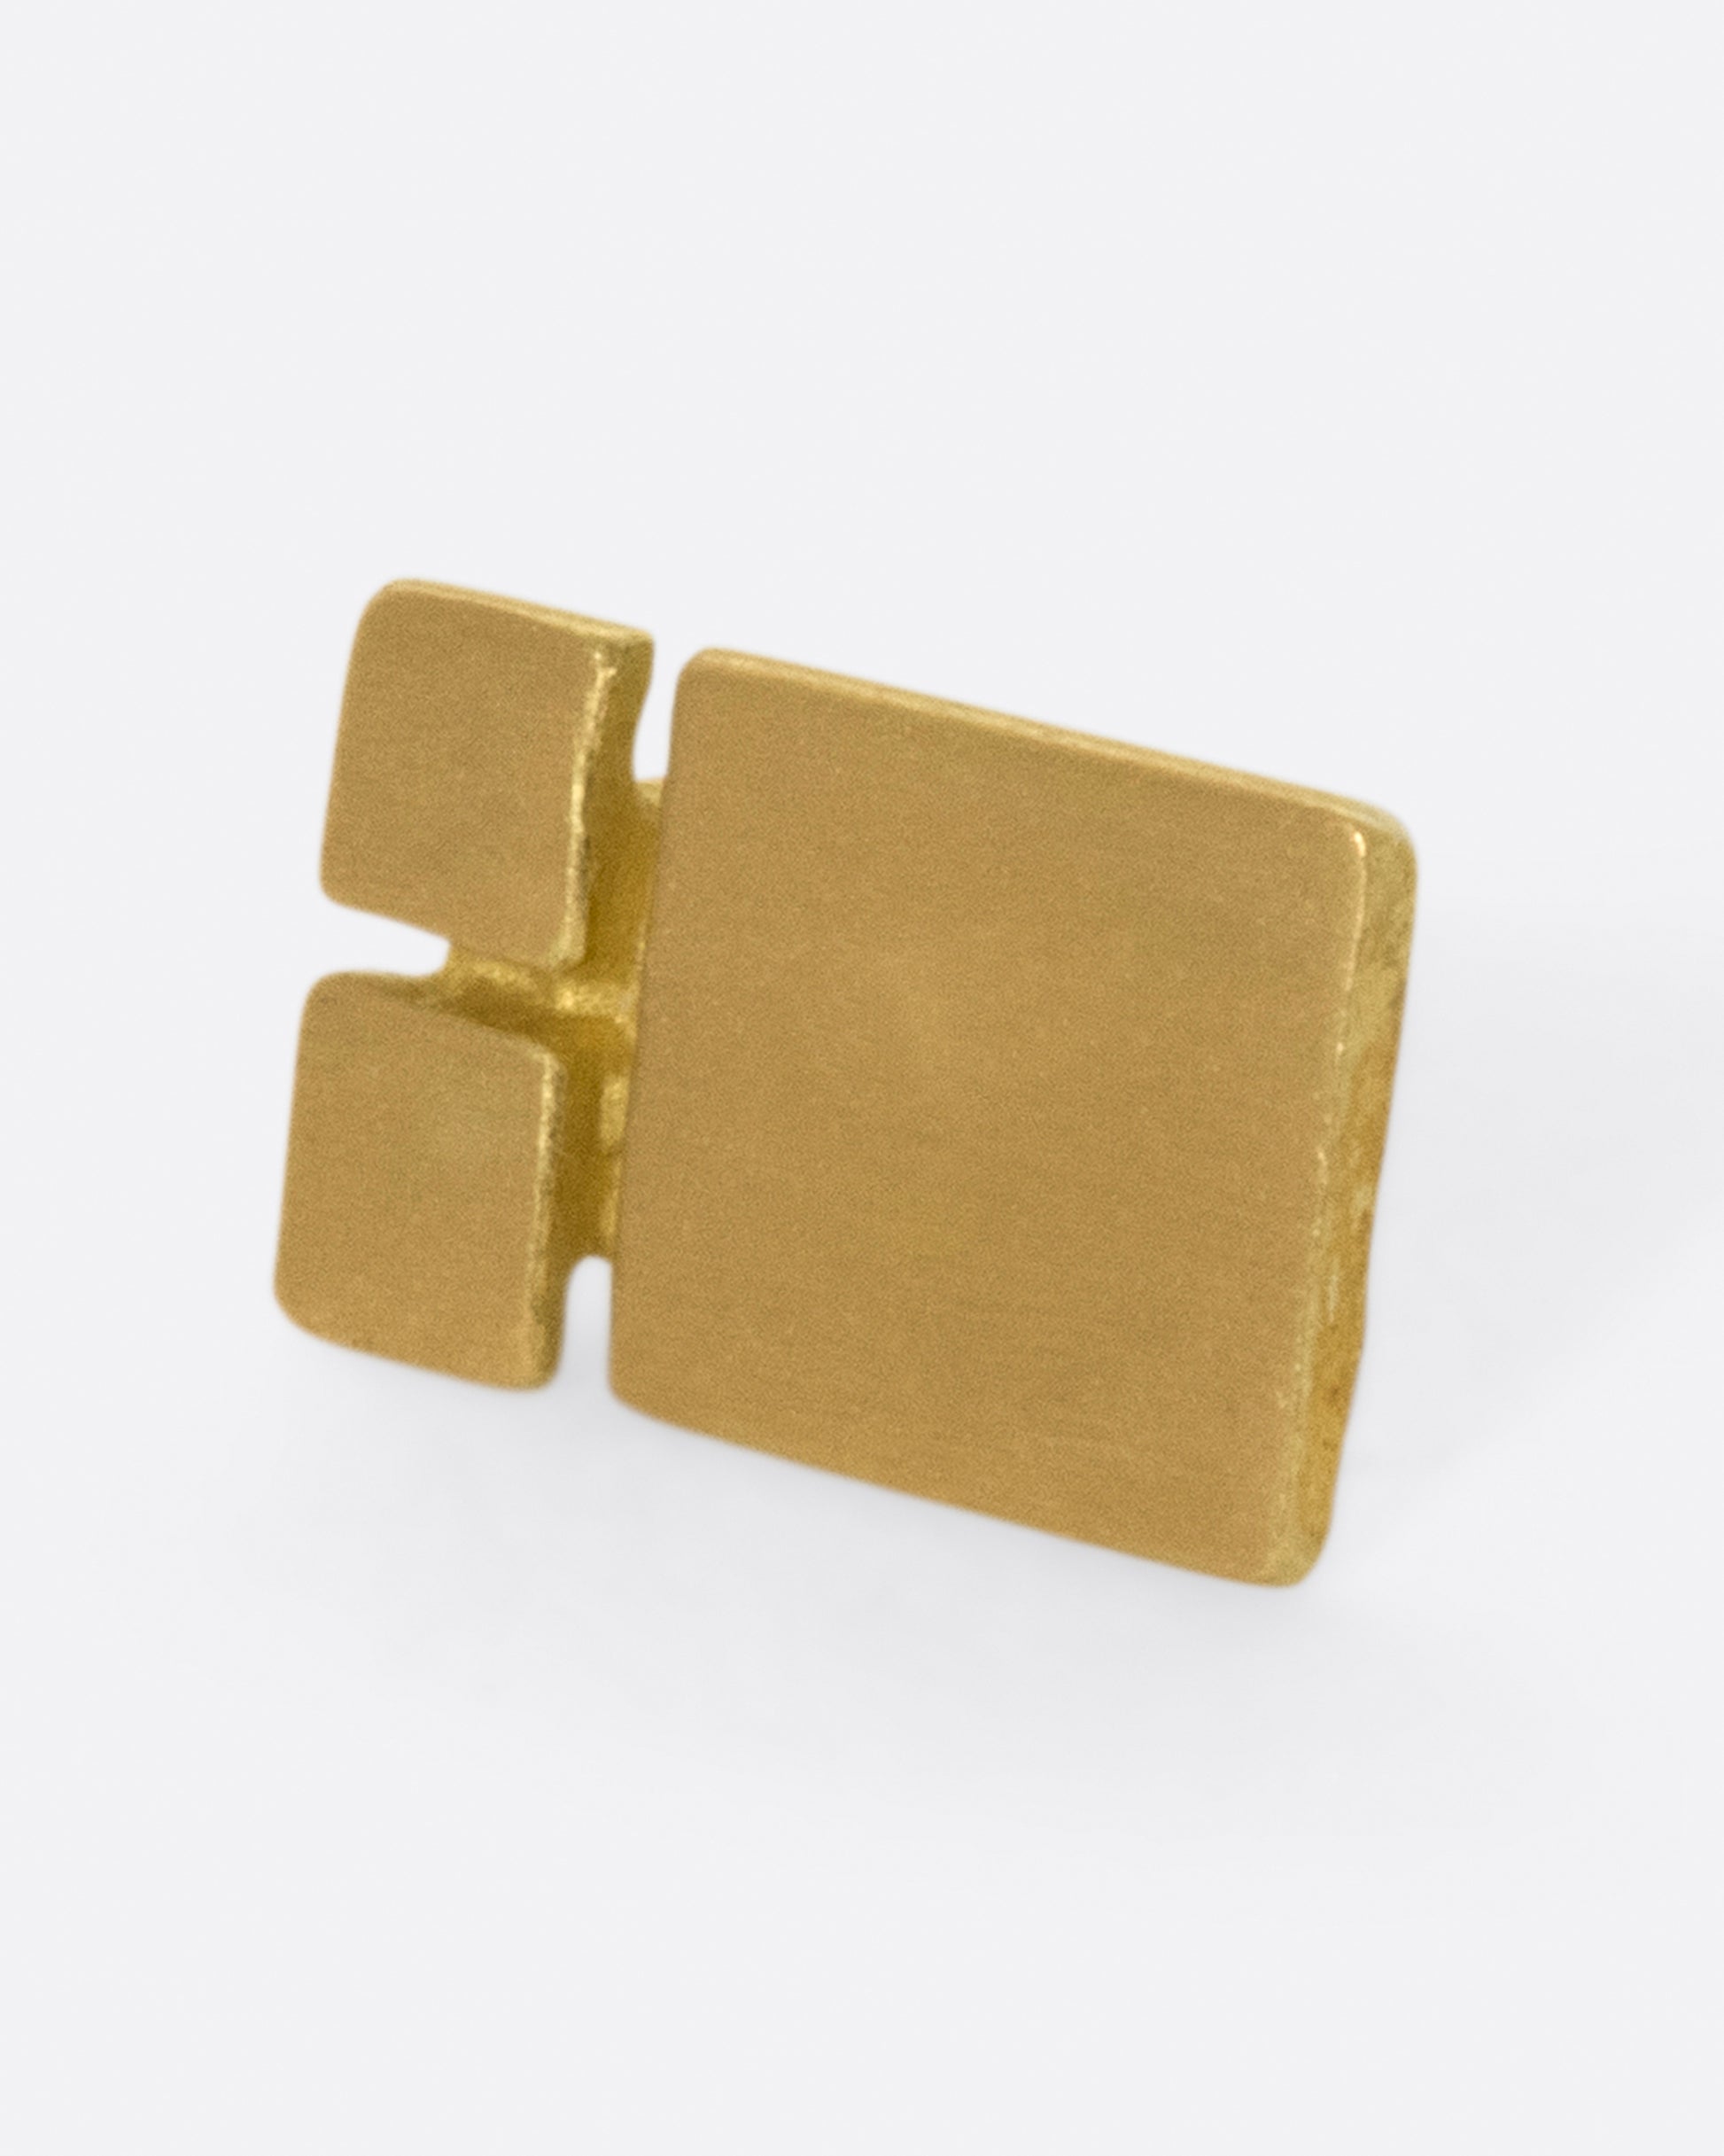 Designed by Adorned founder Lori Leven, this earring offers a bit of texture and geometry while still feeling soft.